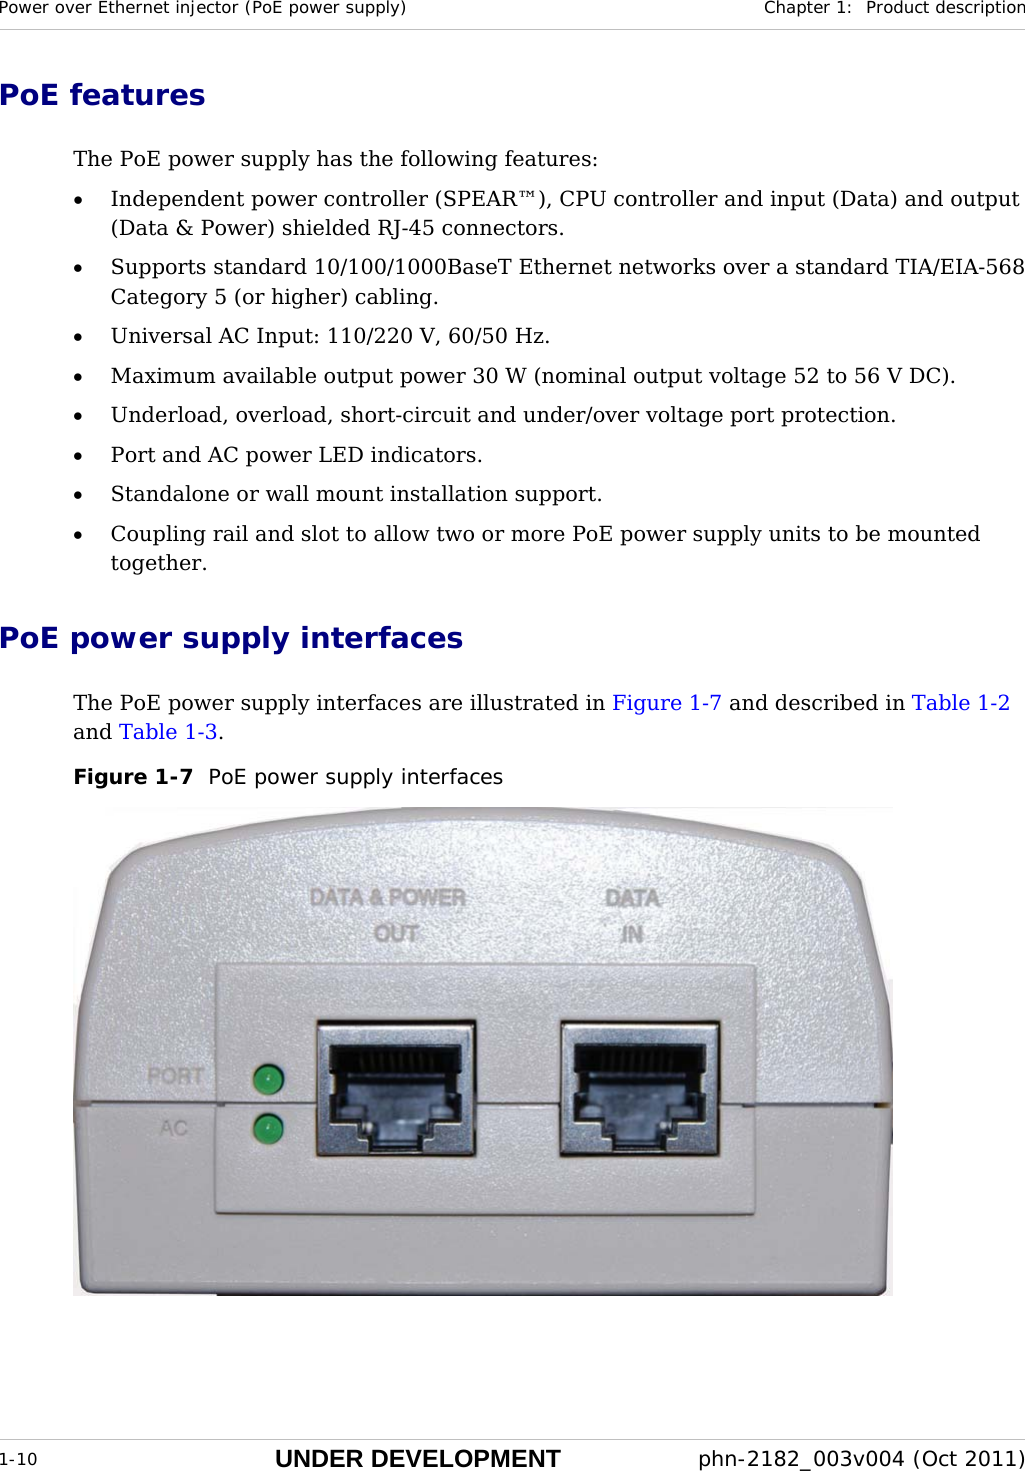 Power over Ethernet injector (PoE power supply)  Chapter 1:  Product description  1-10 UNDER DEVELOPMENT  phn-2182_003v004 (Oct 2011)  PoE features The PoE power supply has the following features: • Independent power controller (SPEAR™), CPU controller and input (Data) and output (Data &amp; Power) shielded RJ-45 connectors. • Supports standard 10/100/1000BaseT Ethernet networks over a standard TIA/EIA-568 Category 5 (or higher) cabling. • Universal AC Input: 110/220 V, 60/50 Hz. • Maximum available output power 30 W (nominal output voltage 52 to 56 V DC). • Underload, overload, short-circuit and under/over voltage port protection. • Port and AC power LED indicators. • Standalone or wall mount installation support. • Coupling rail and slot to allow two or more PoE power supply units to be mounted together. PoE power supply interfaces The PoE power supply interfaces are illustrated in Figure 1-7 and described in Table 1-2 and Table 1-3. Figure 1-7  PoE power supply interfaces   